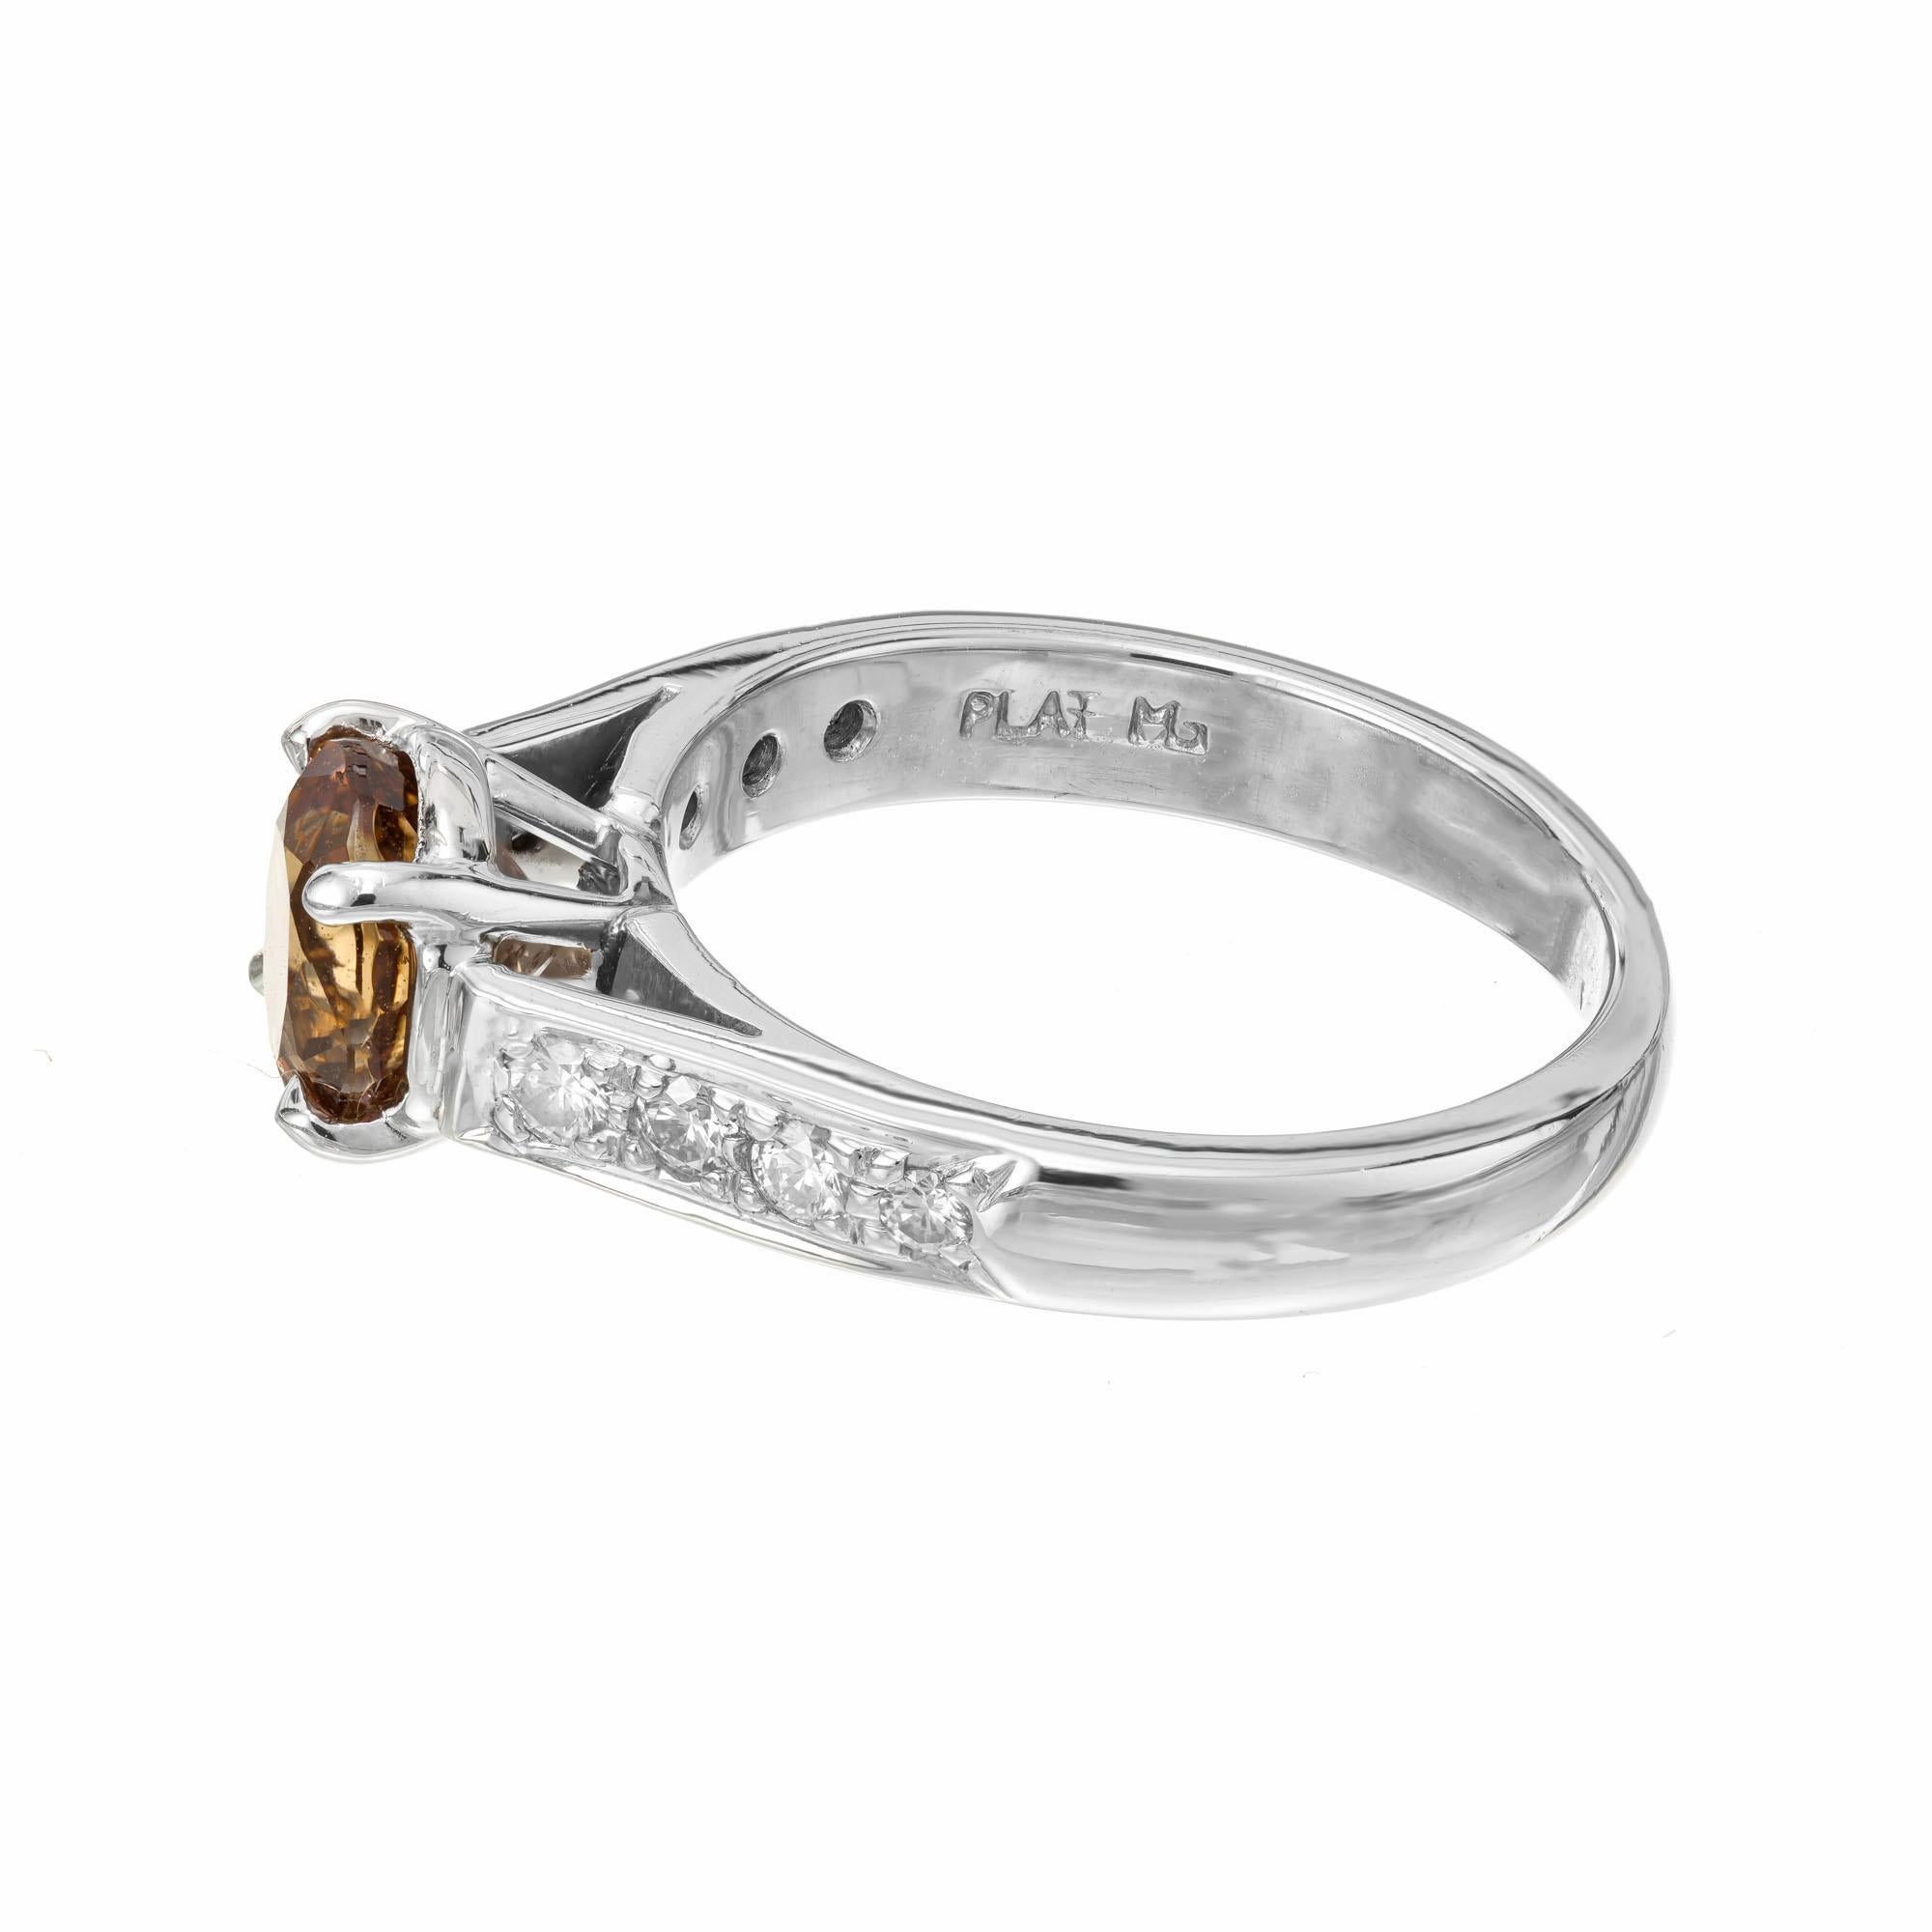 brown sapphire ring